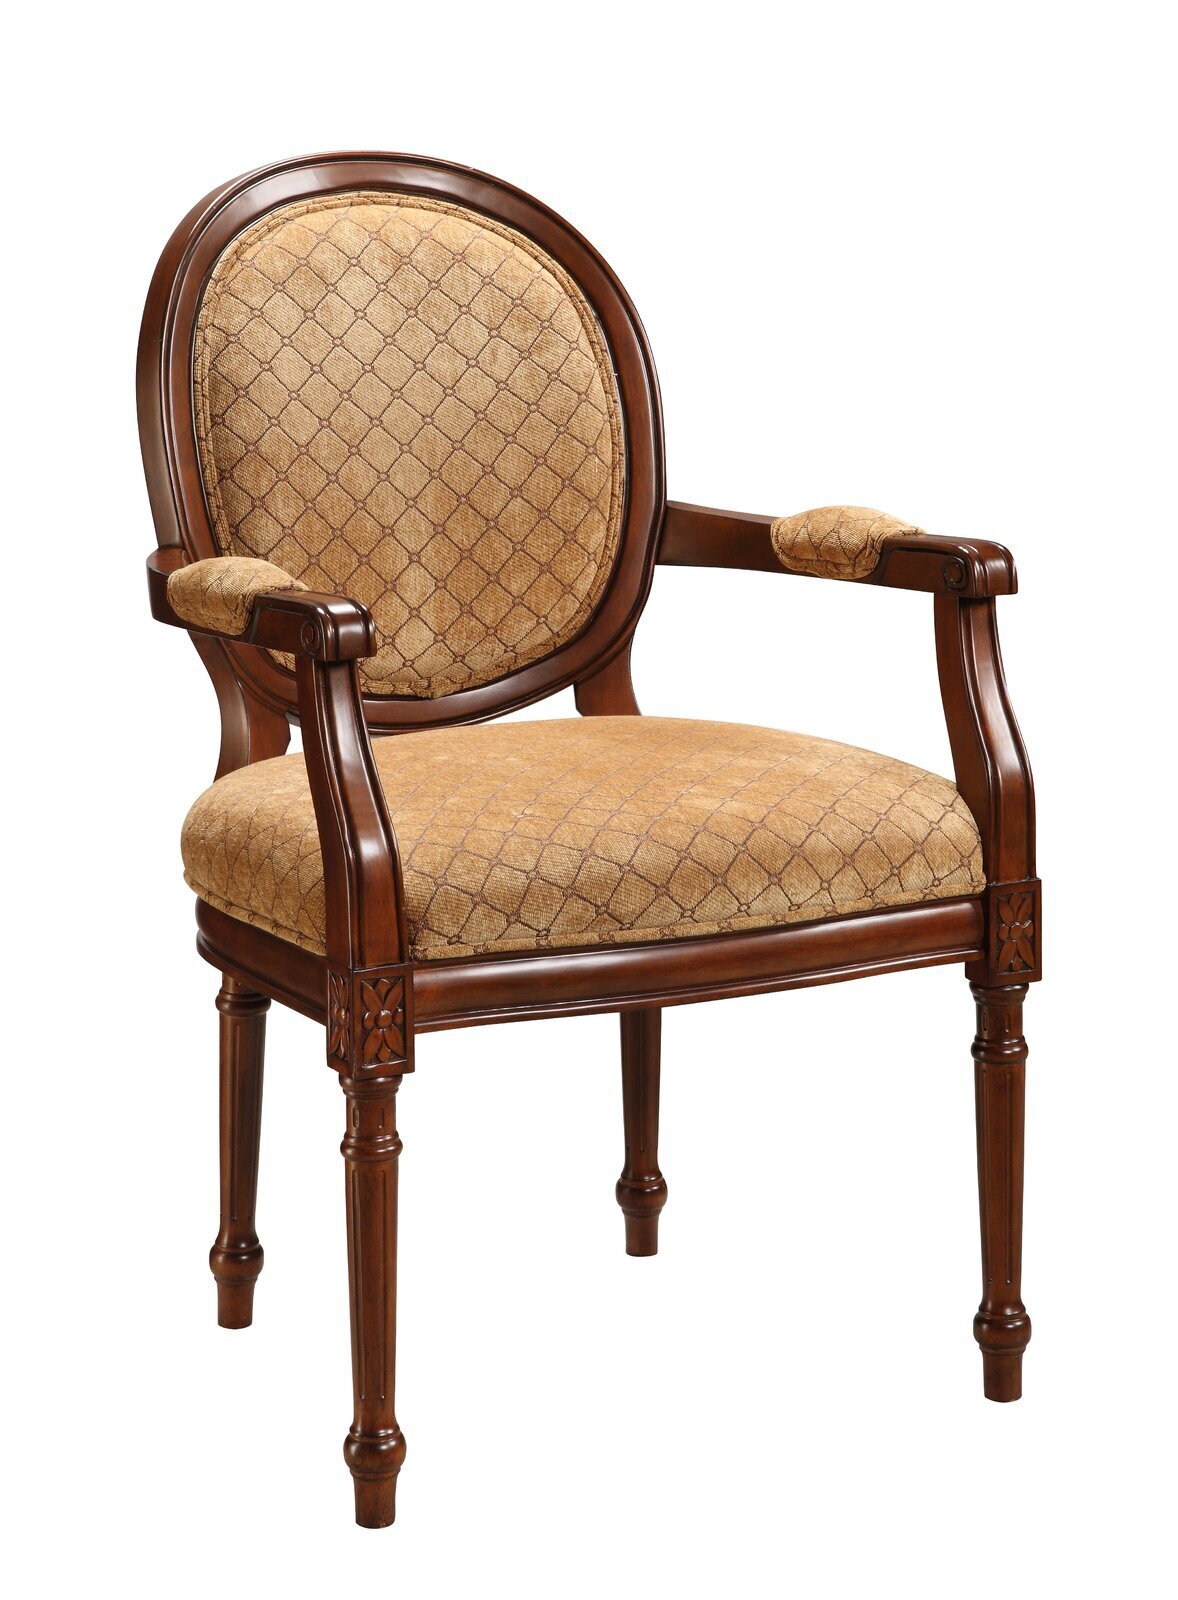 Victorian accent chair